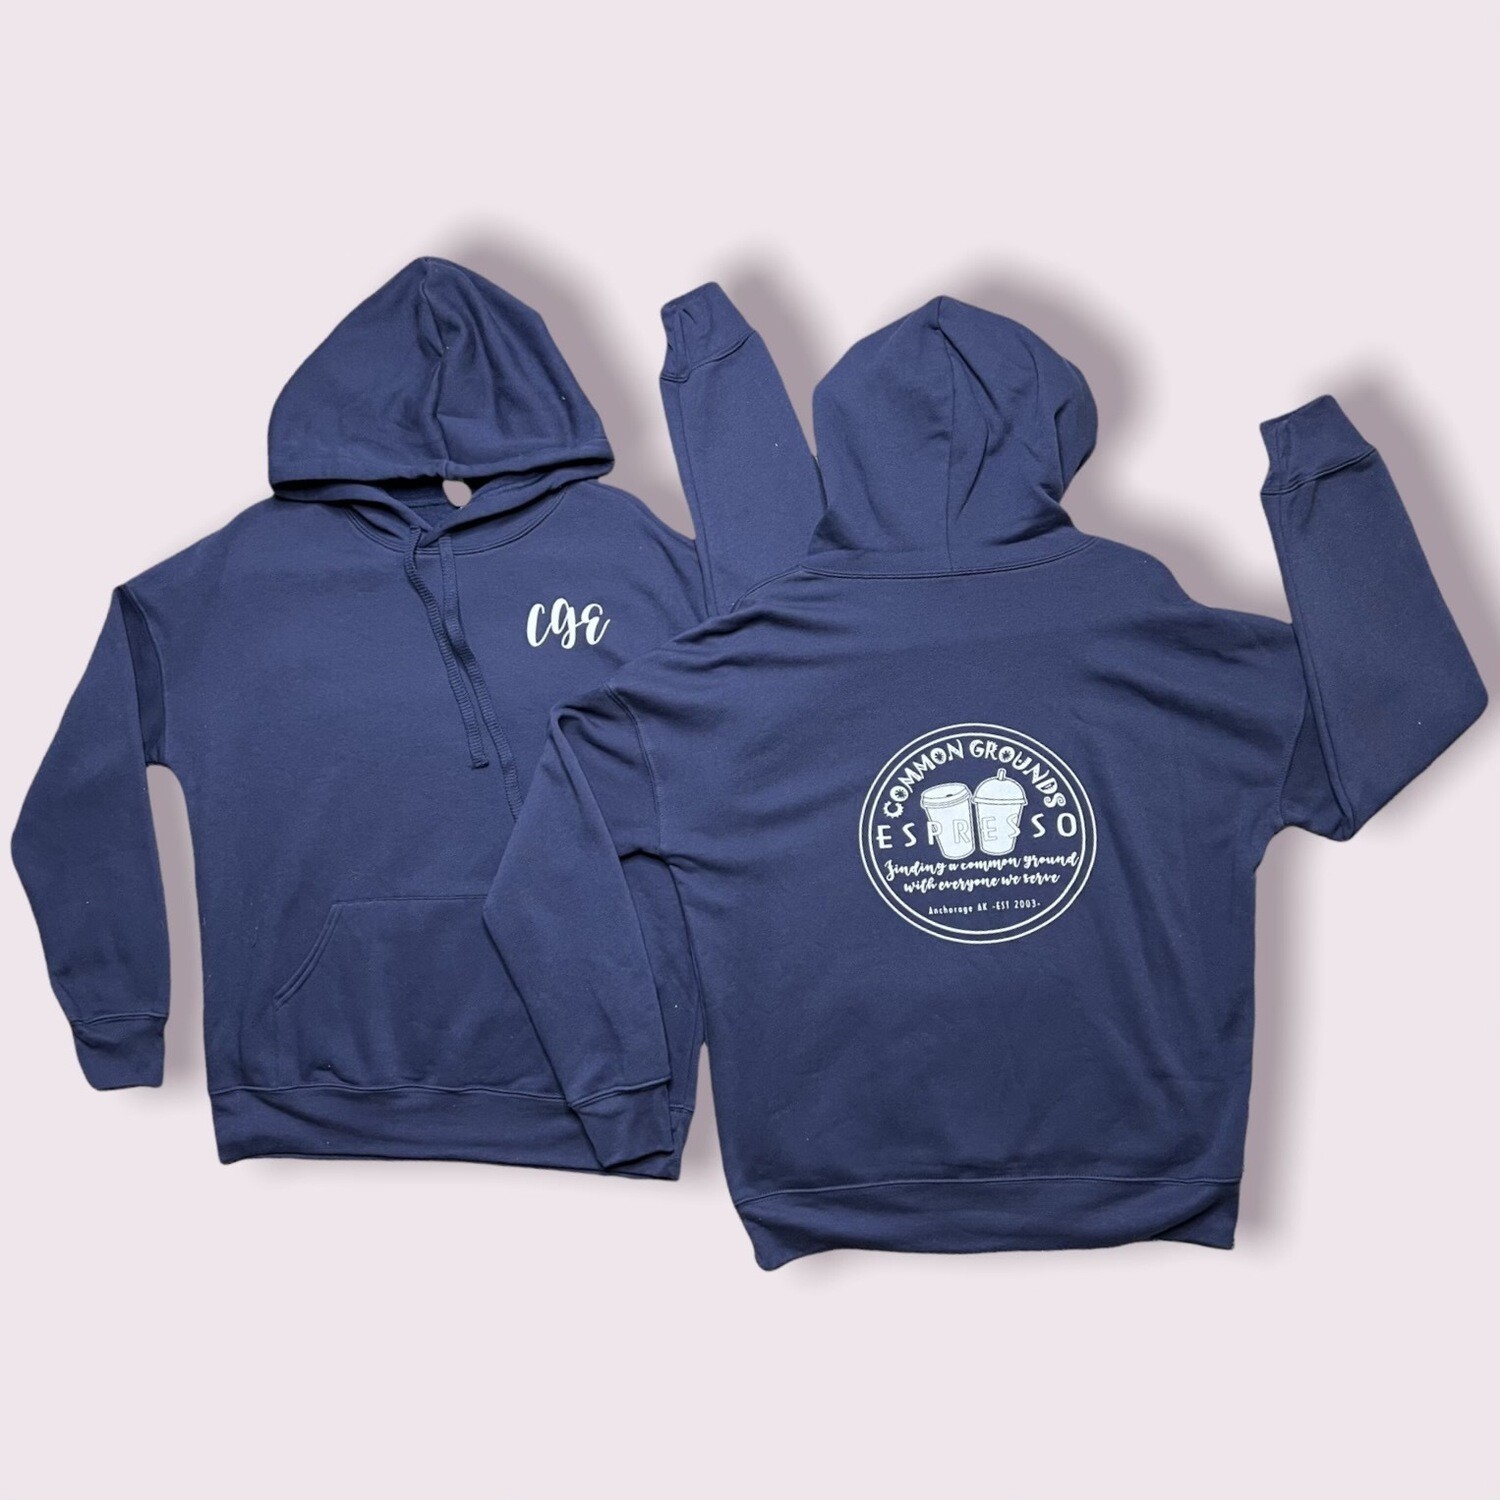 Full length Hoodie Navy Blue, sizes: small